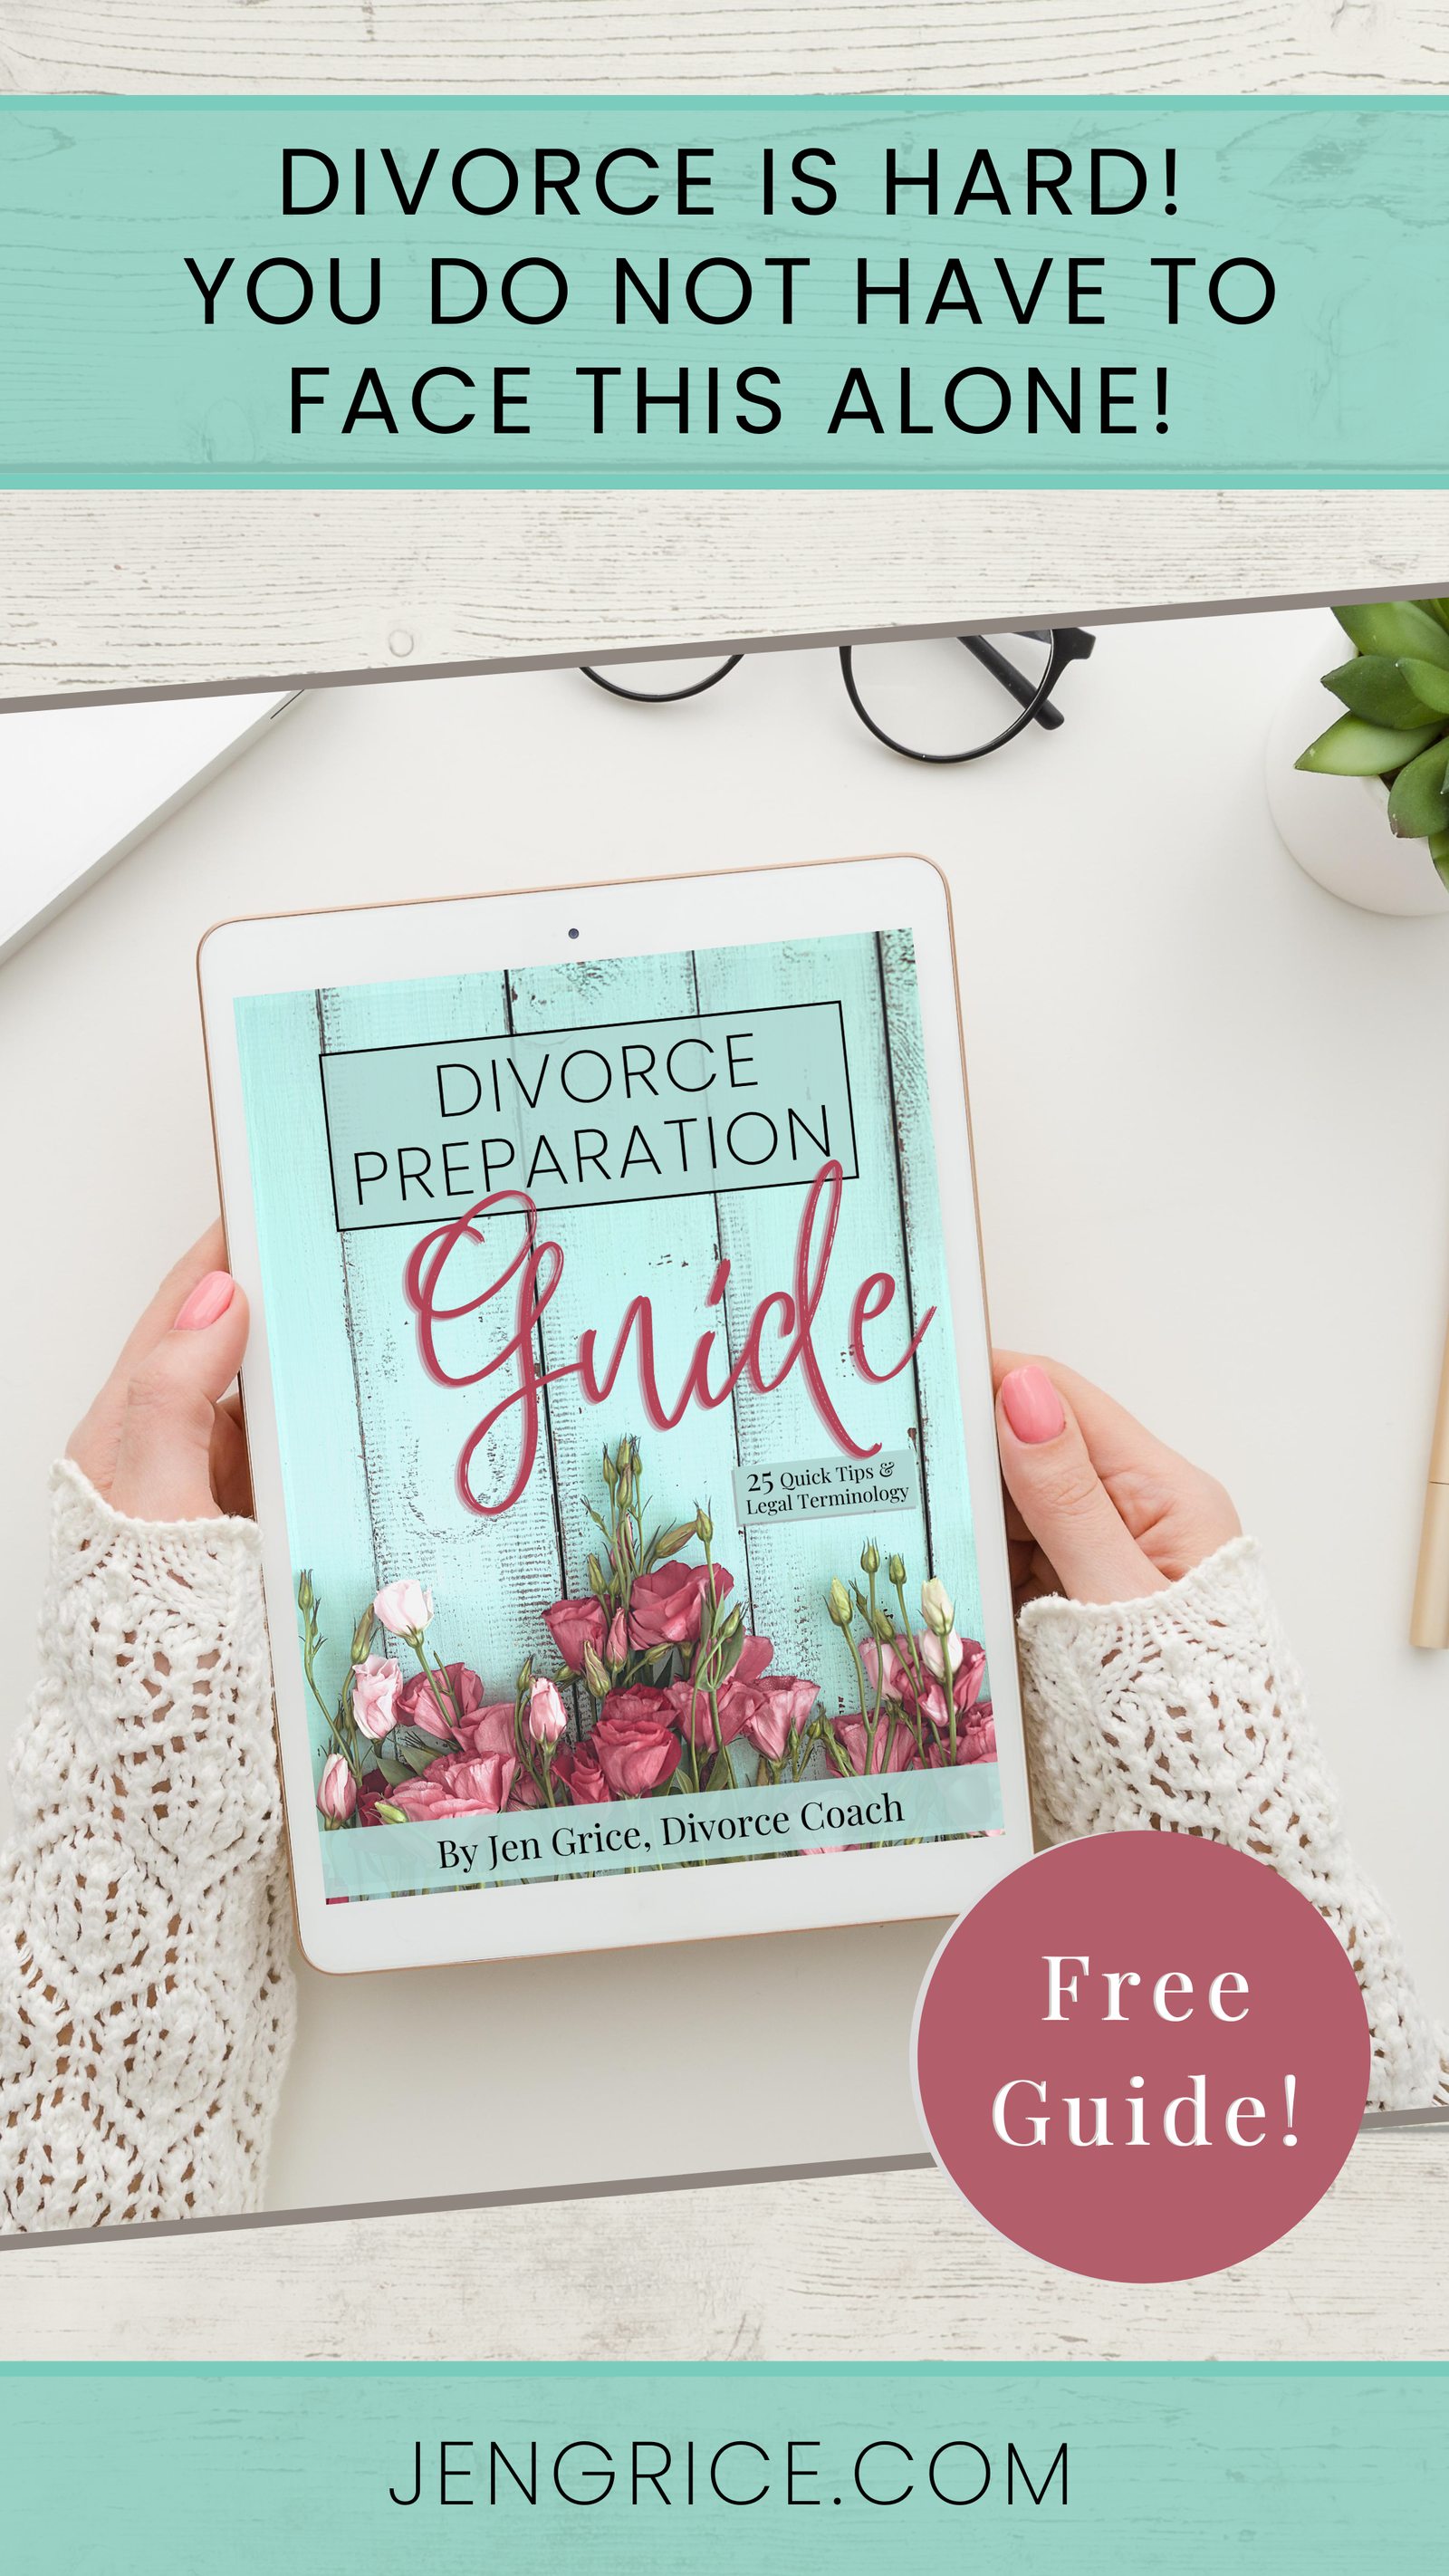 Divorce is hard! You need to be prepared. With this FREE preparation guide, you'll know what all the divorce legal terminology means, what questions to ask a lawyer before hiring them PLUS 25 quick tips to get you started. via @msjengrice